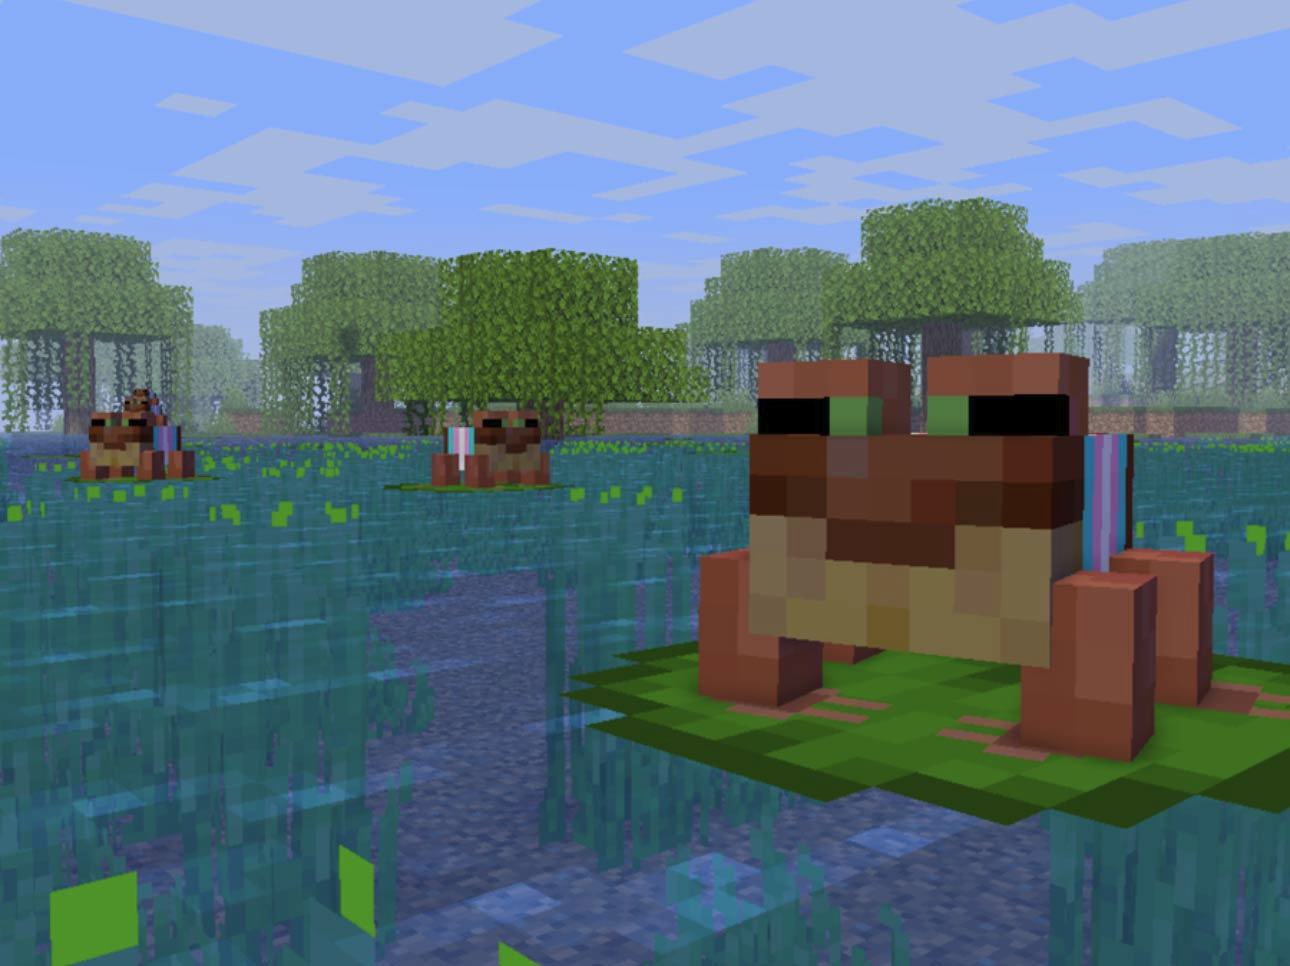 Mojang hasn't given us a frog snapshot yet, so I painstakingly recreated them, with a twist